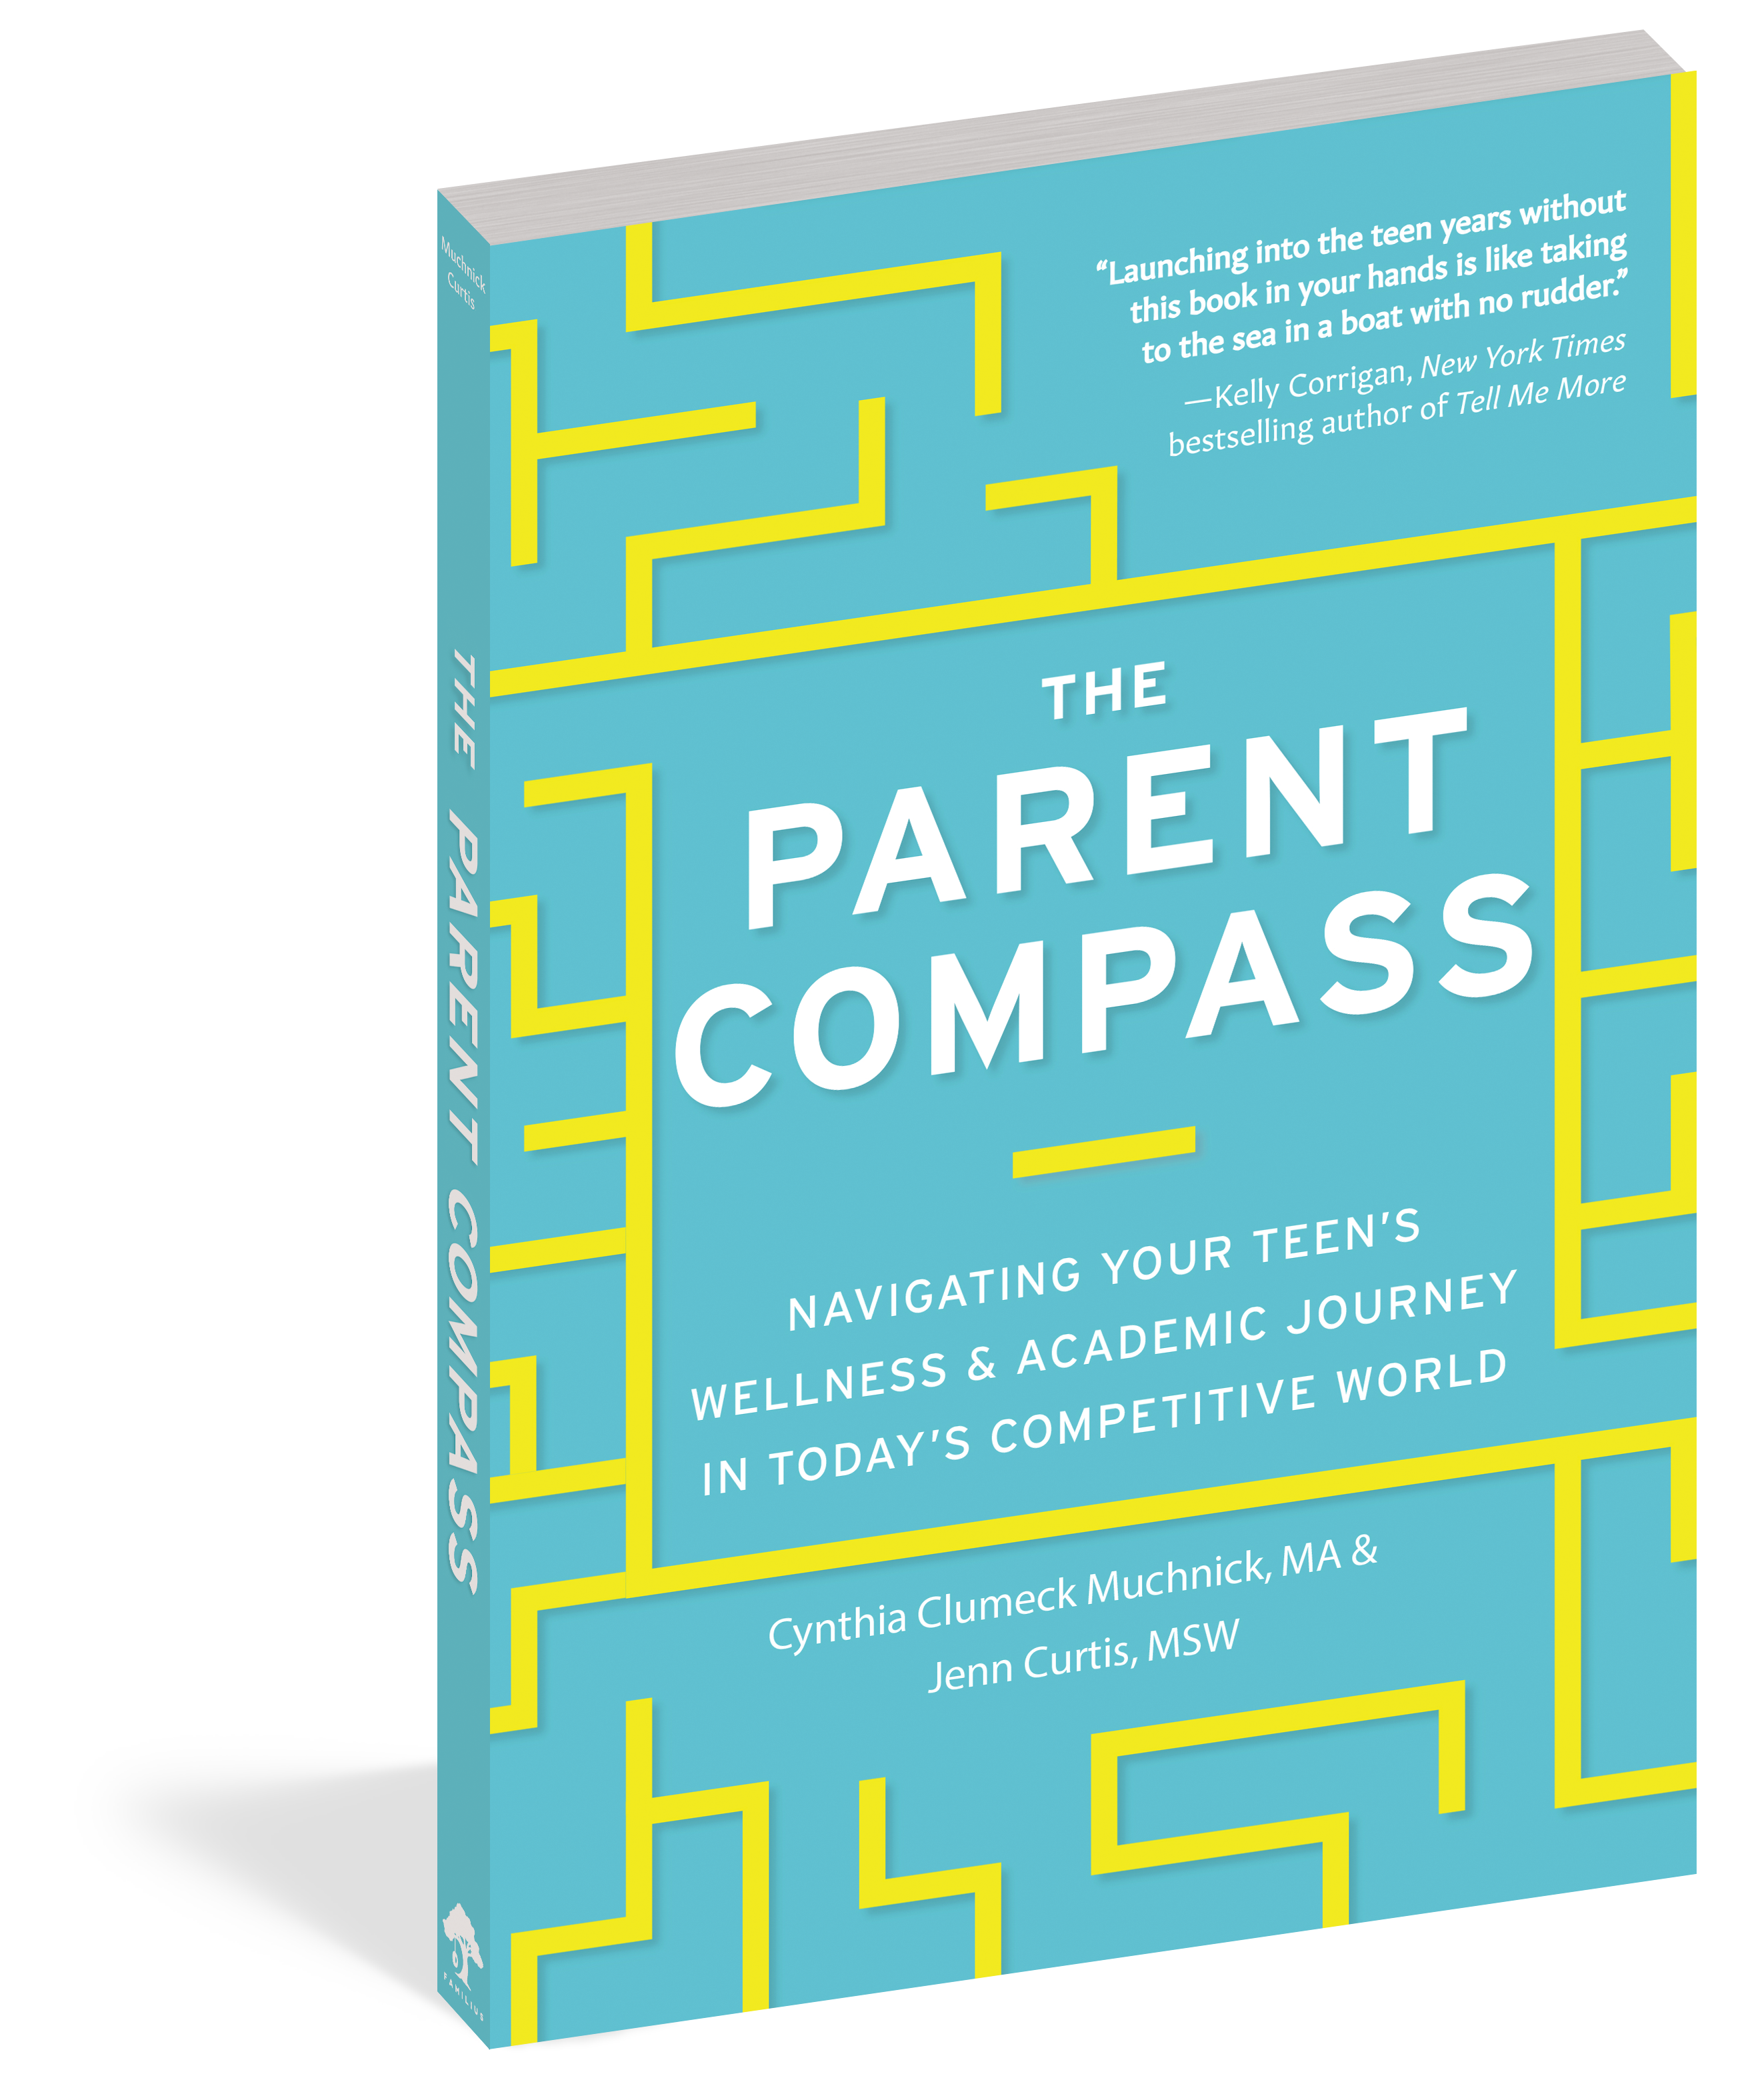 The cover of the parenting book The Parent Compass.